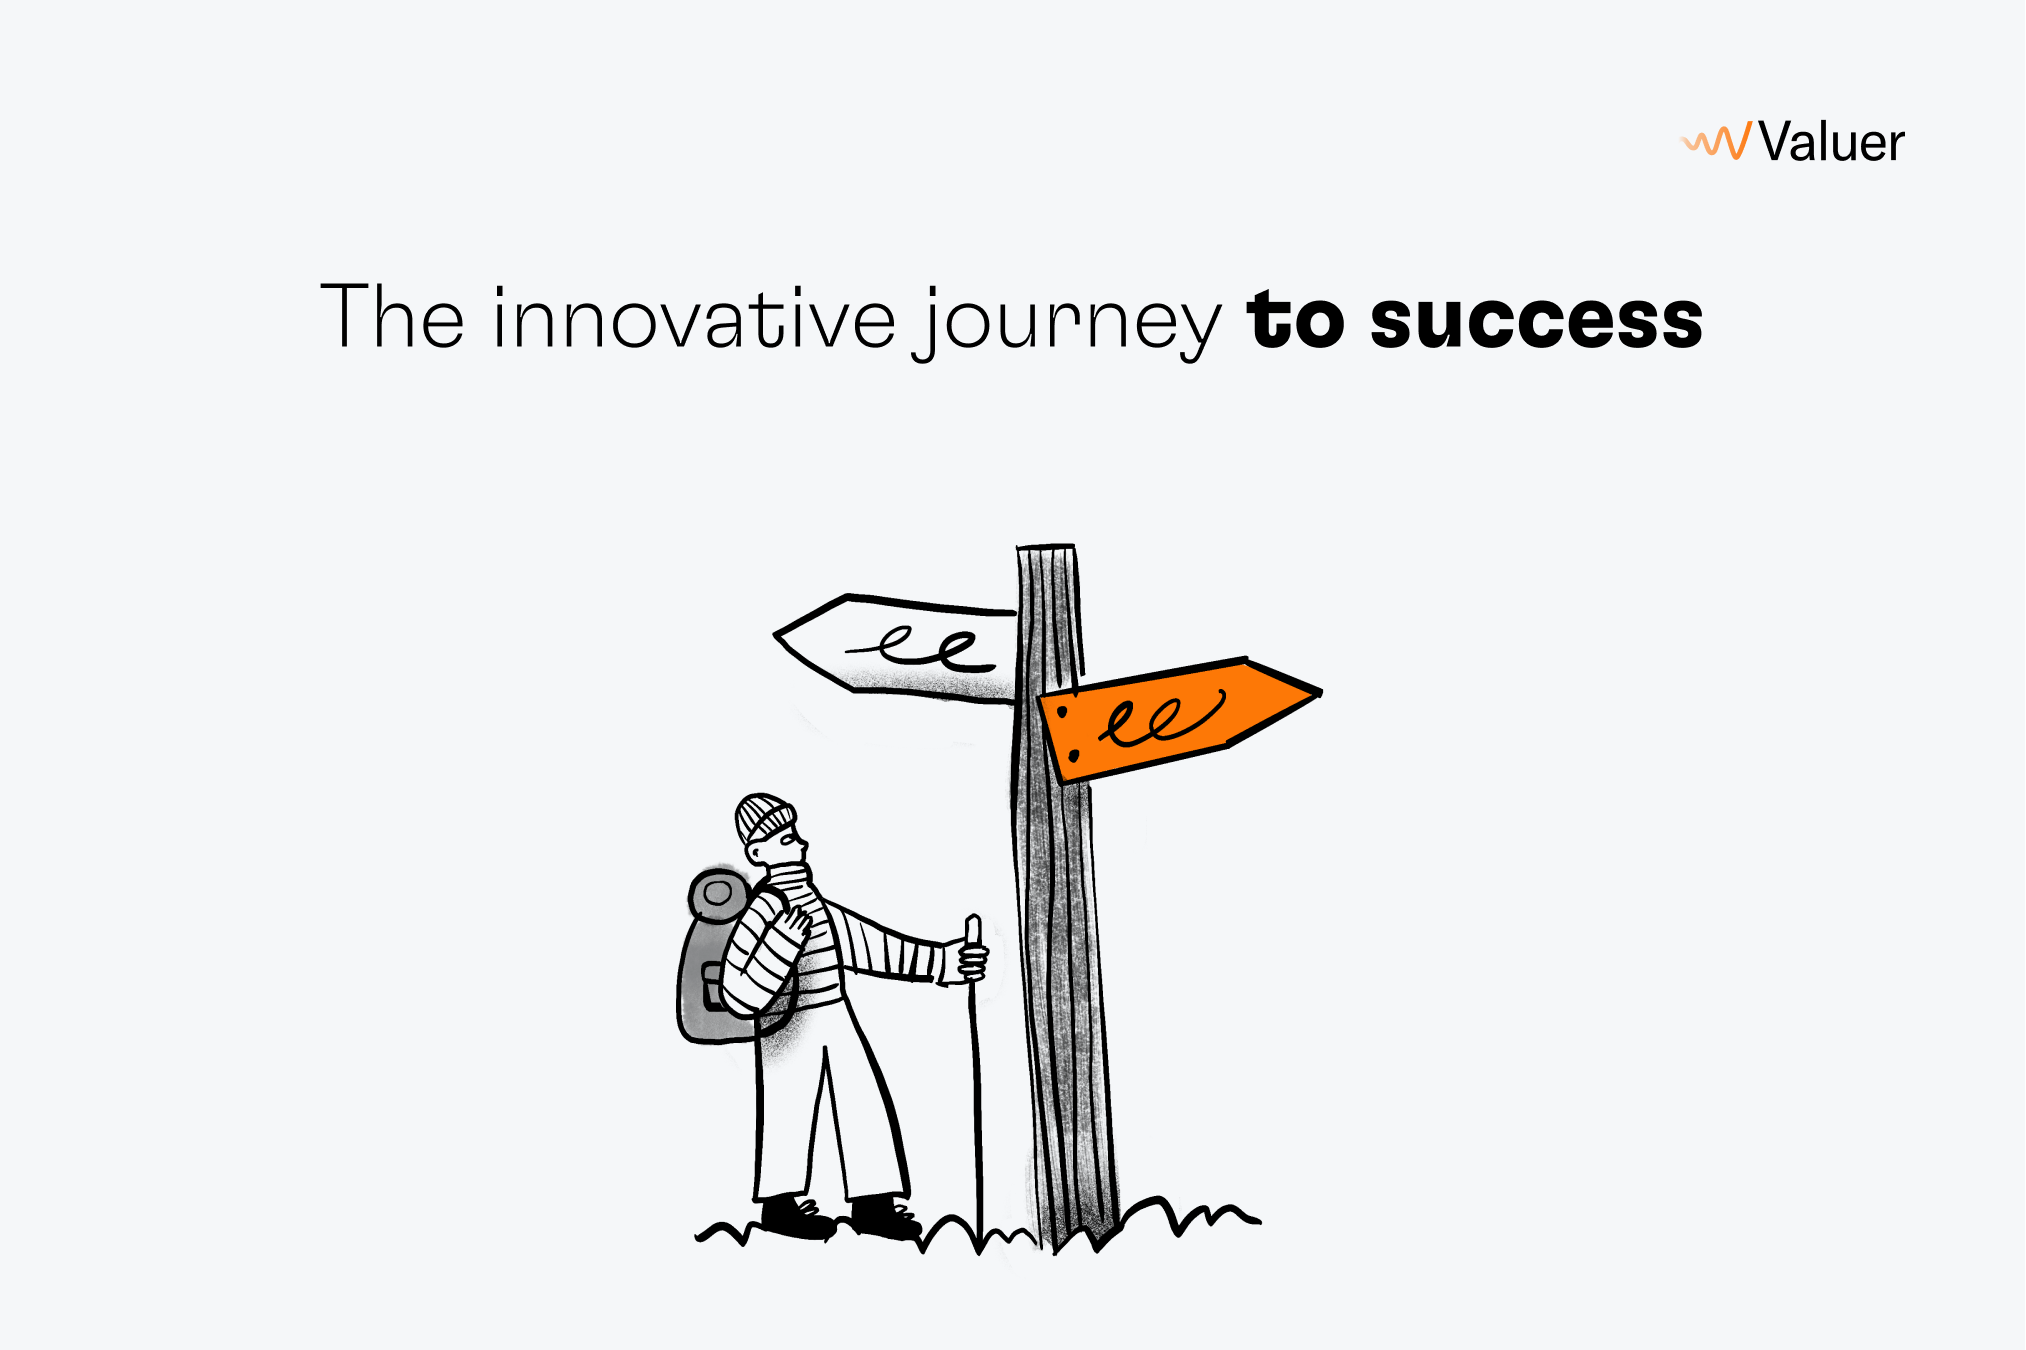 The innovative journey to success